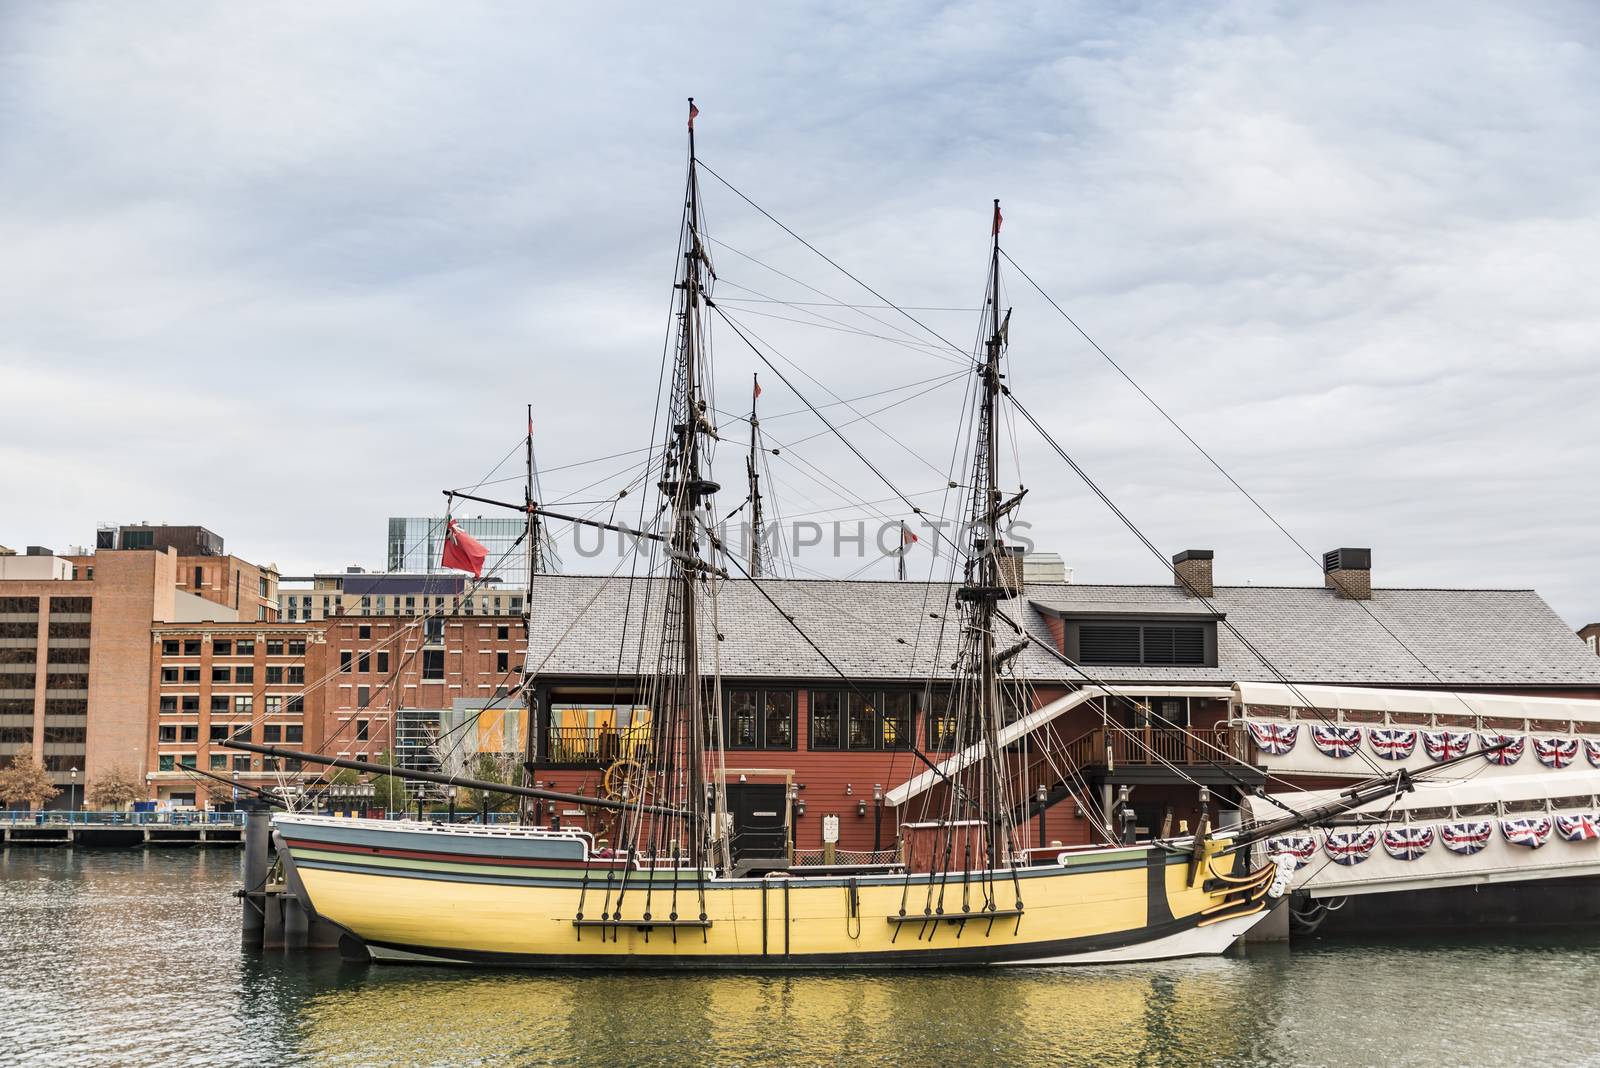 BOSTON - DECEMBER 13: The Boston Tea Party Museum on December 13, 2015, 2013. The museum was closed for eleven years after a fire, but reopened in June 2012.